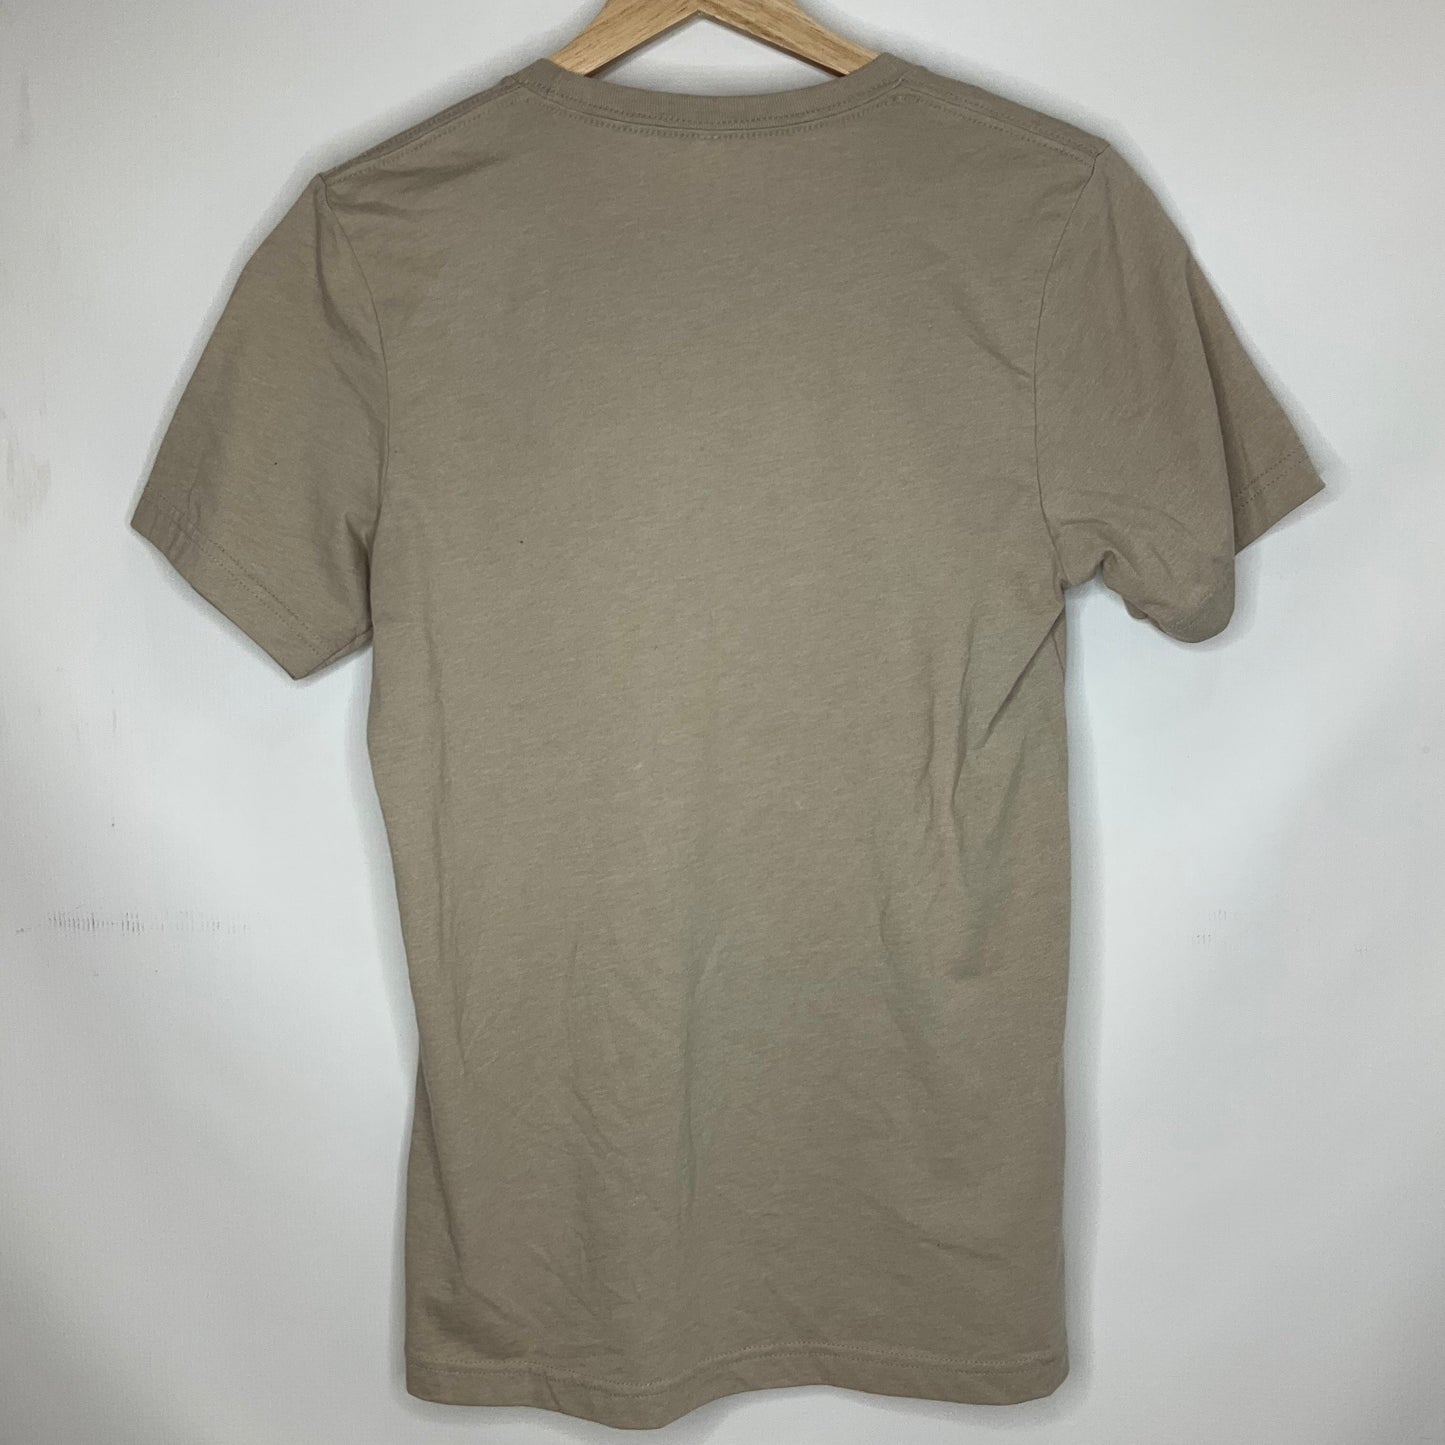 Tan Top Short Sleeve Canvasback, Size S